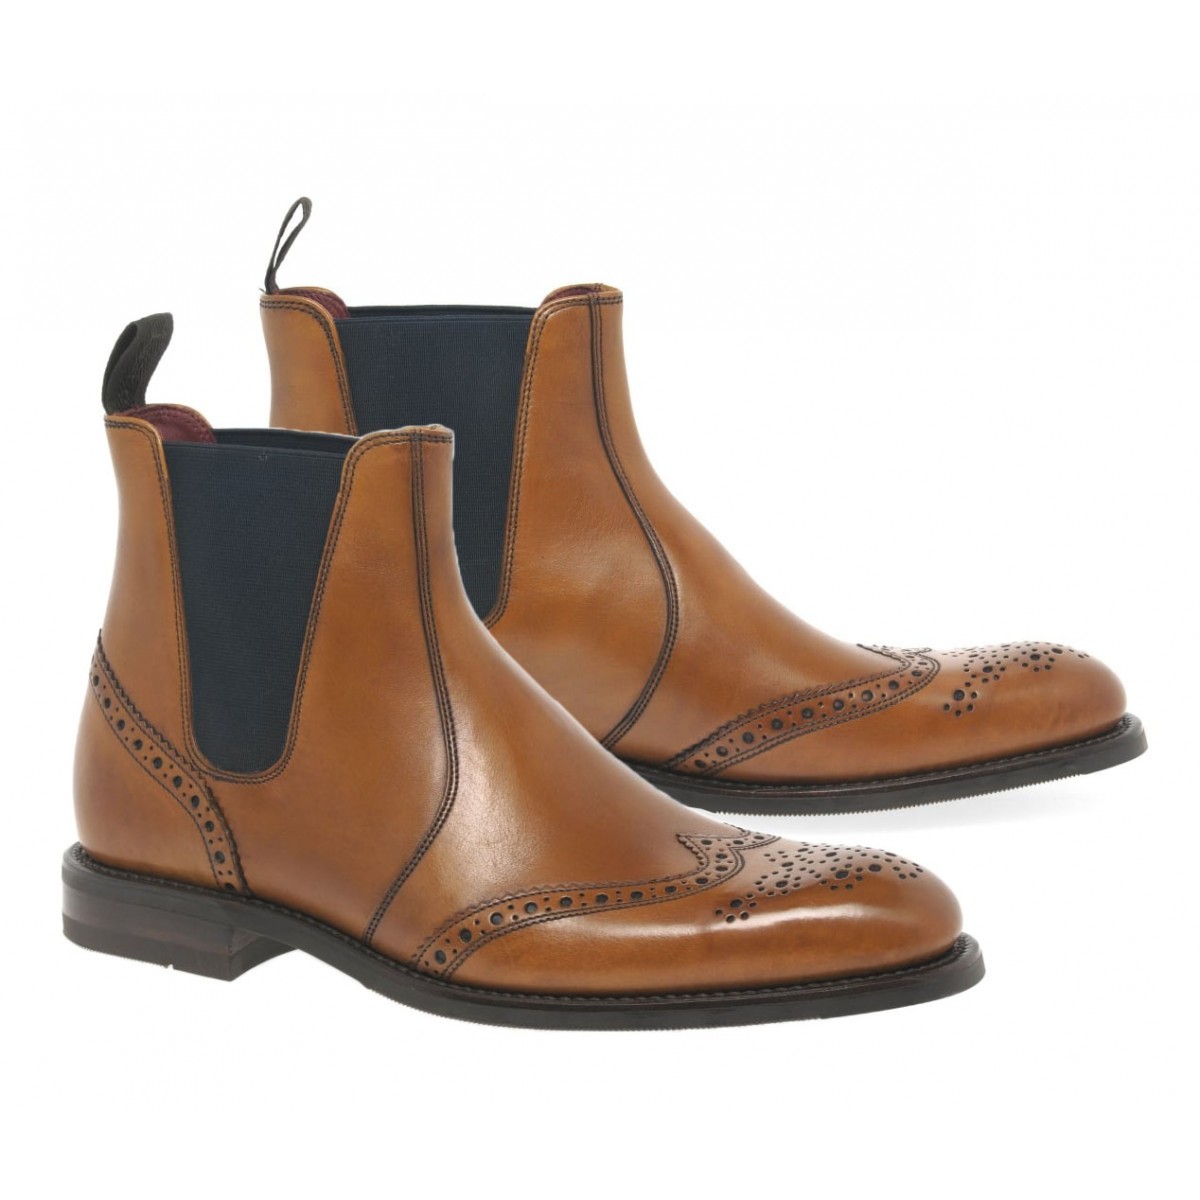 HANDMADE CHELSEA BROGUE LEATHER BOOTS FORMAL CASUAL DRESS LEATHER BOOTS FOR MEN - $169.97